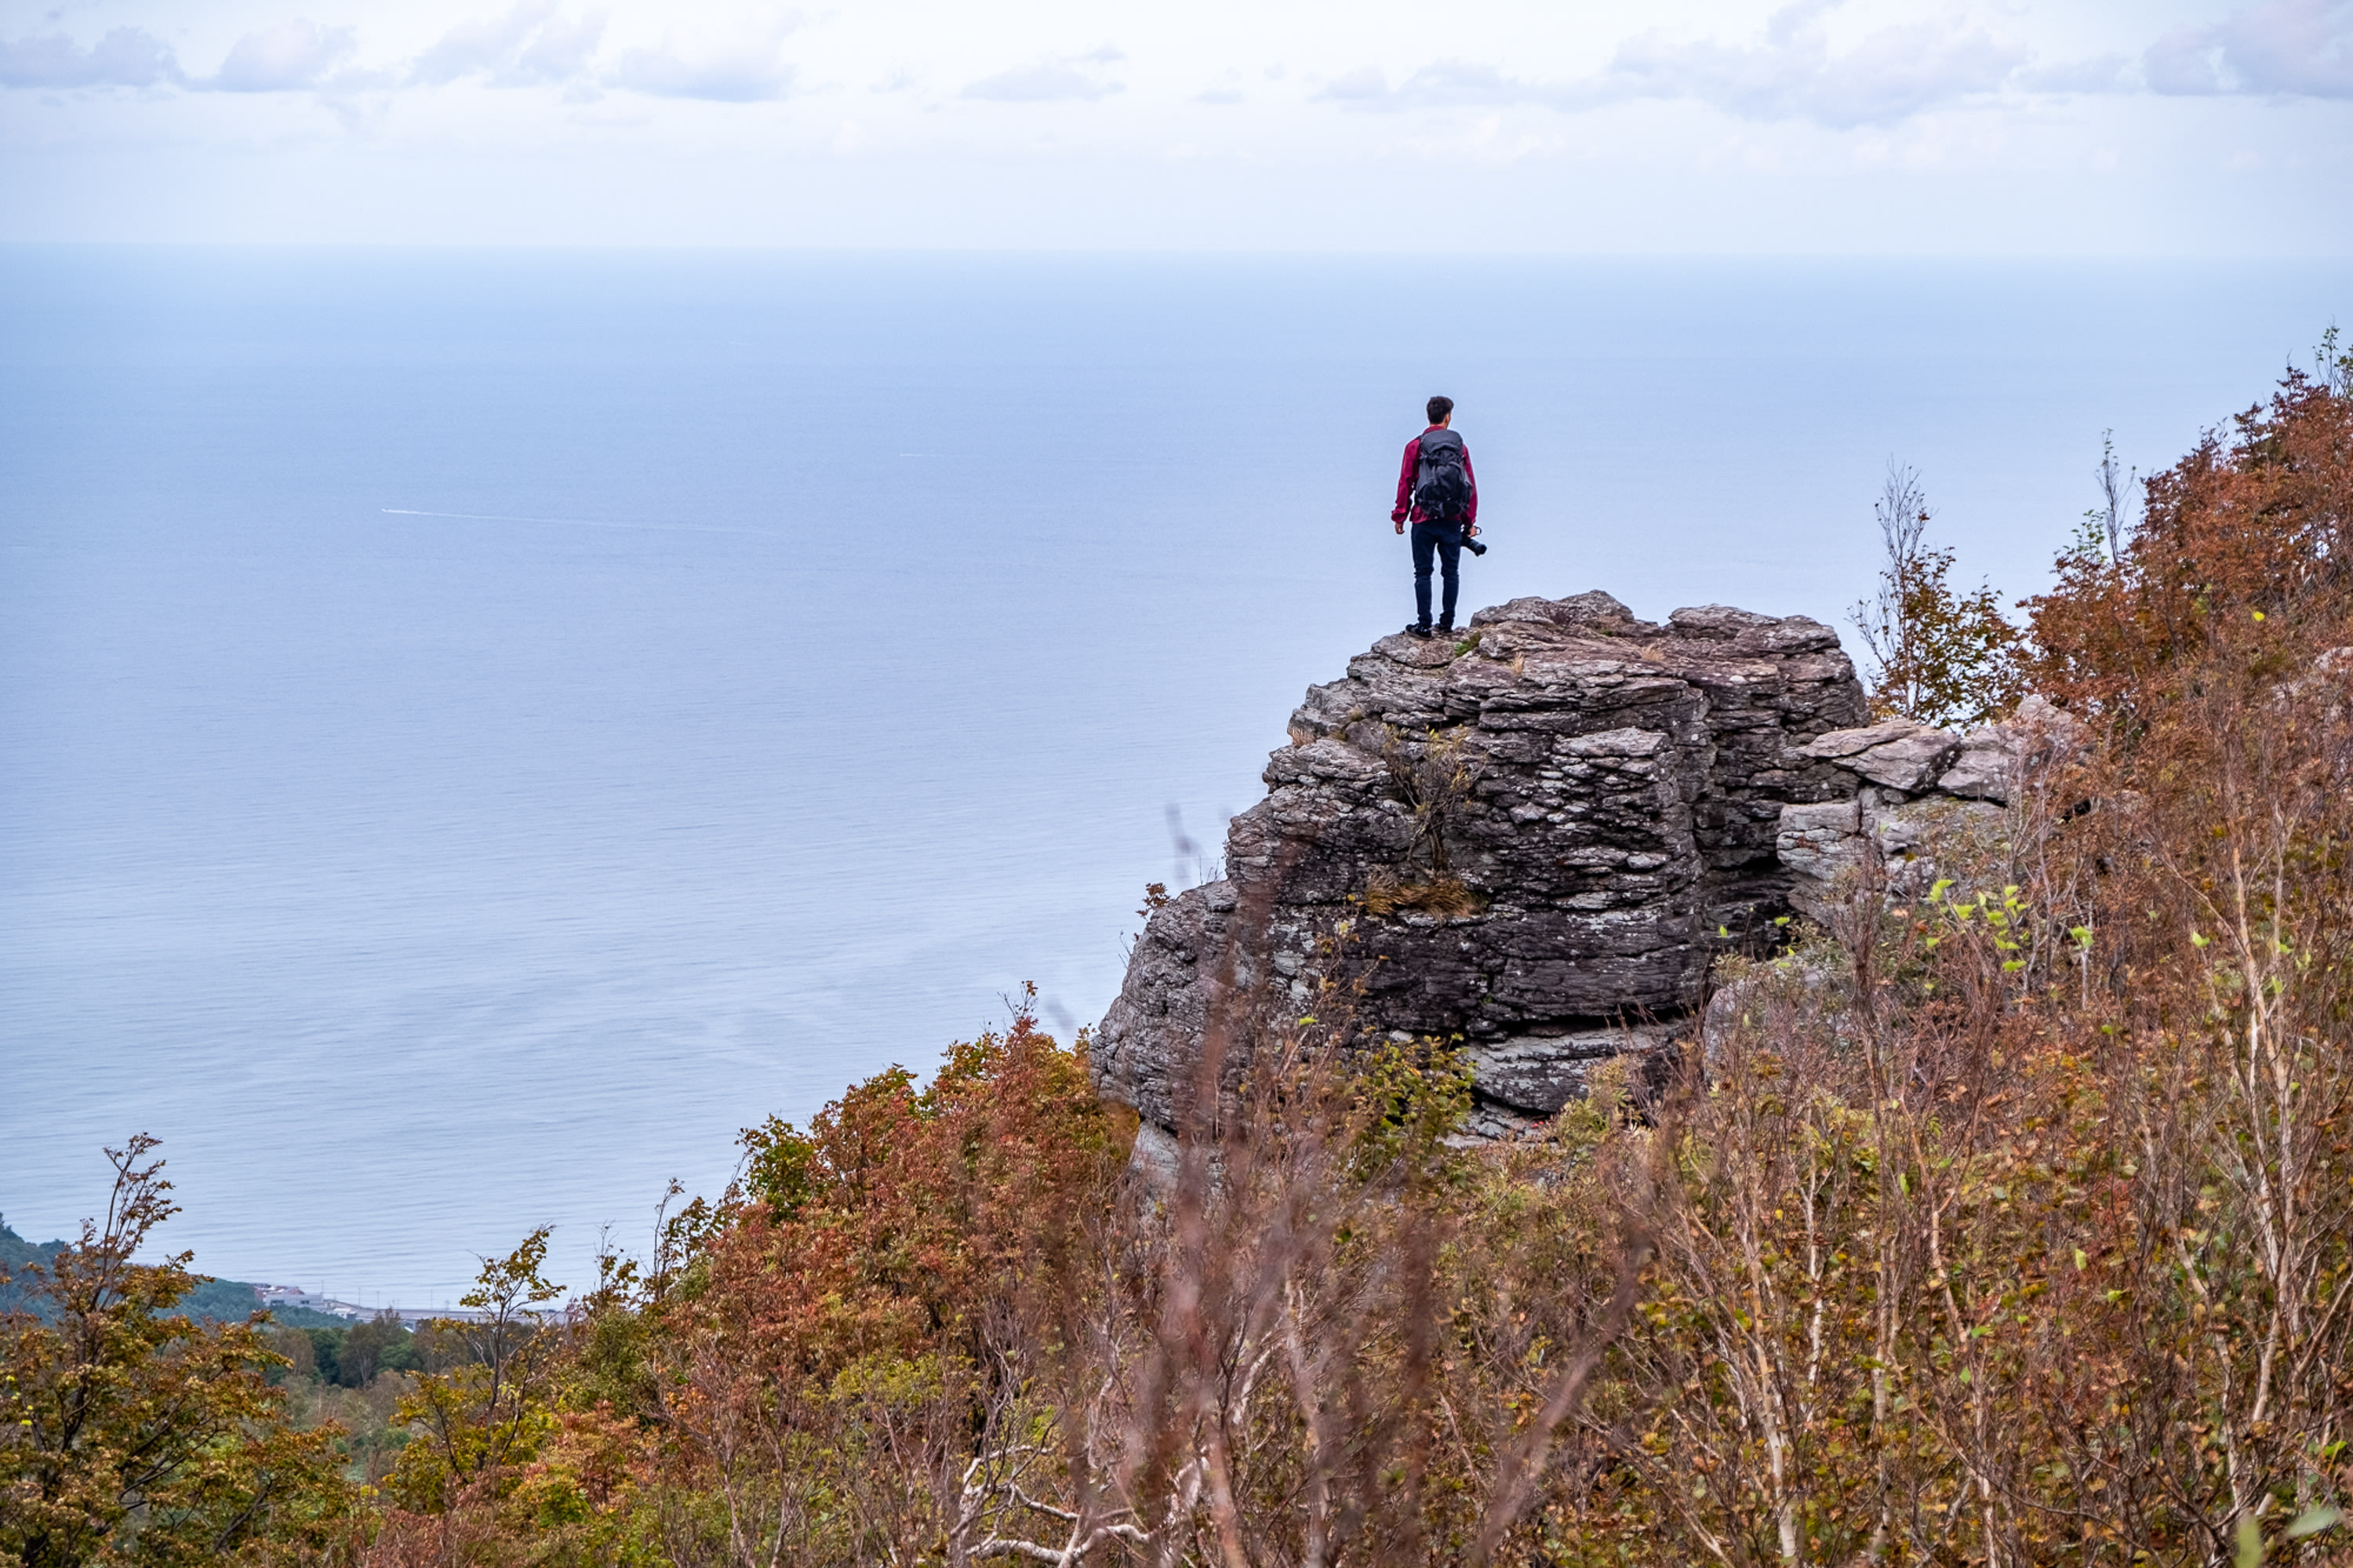 A photographer stands on a rock formation, gazing out over the ocean below.